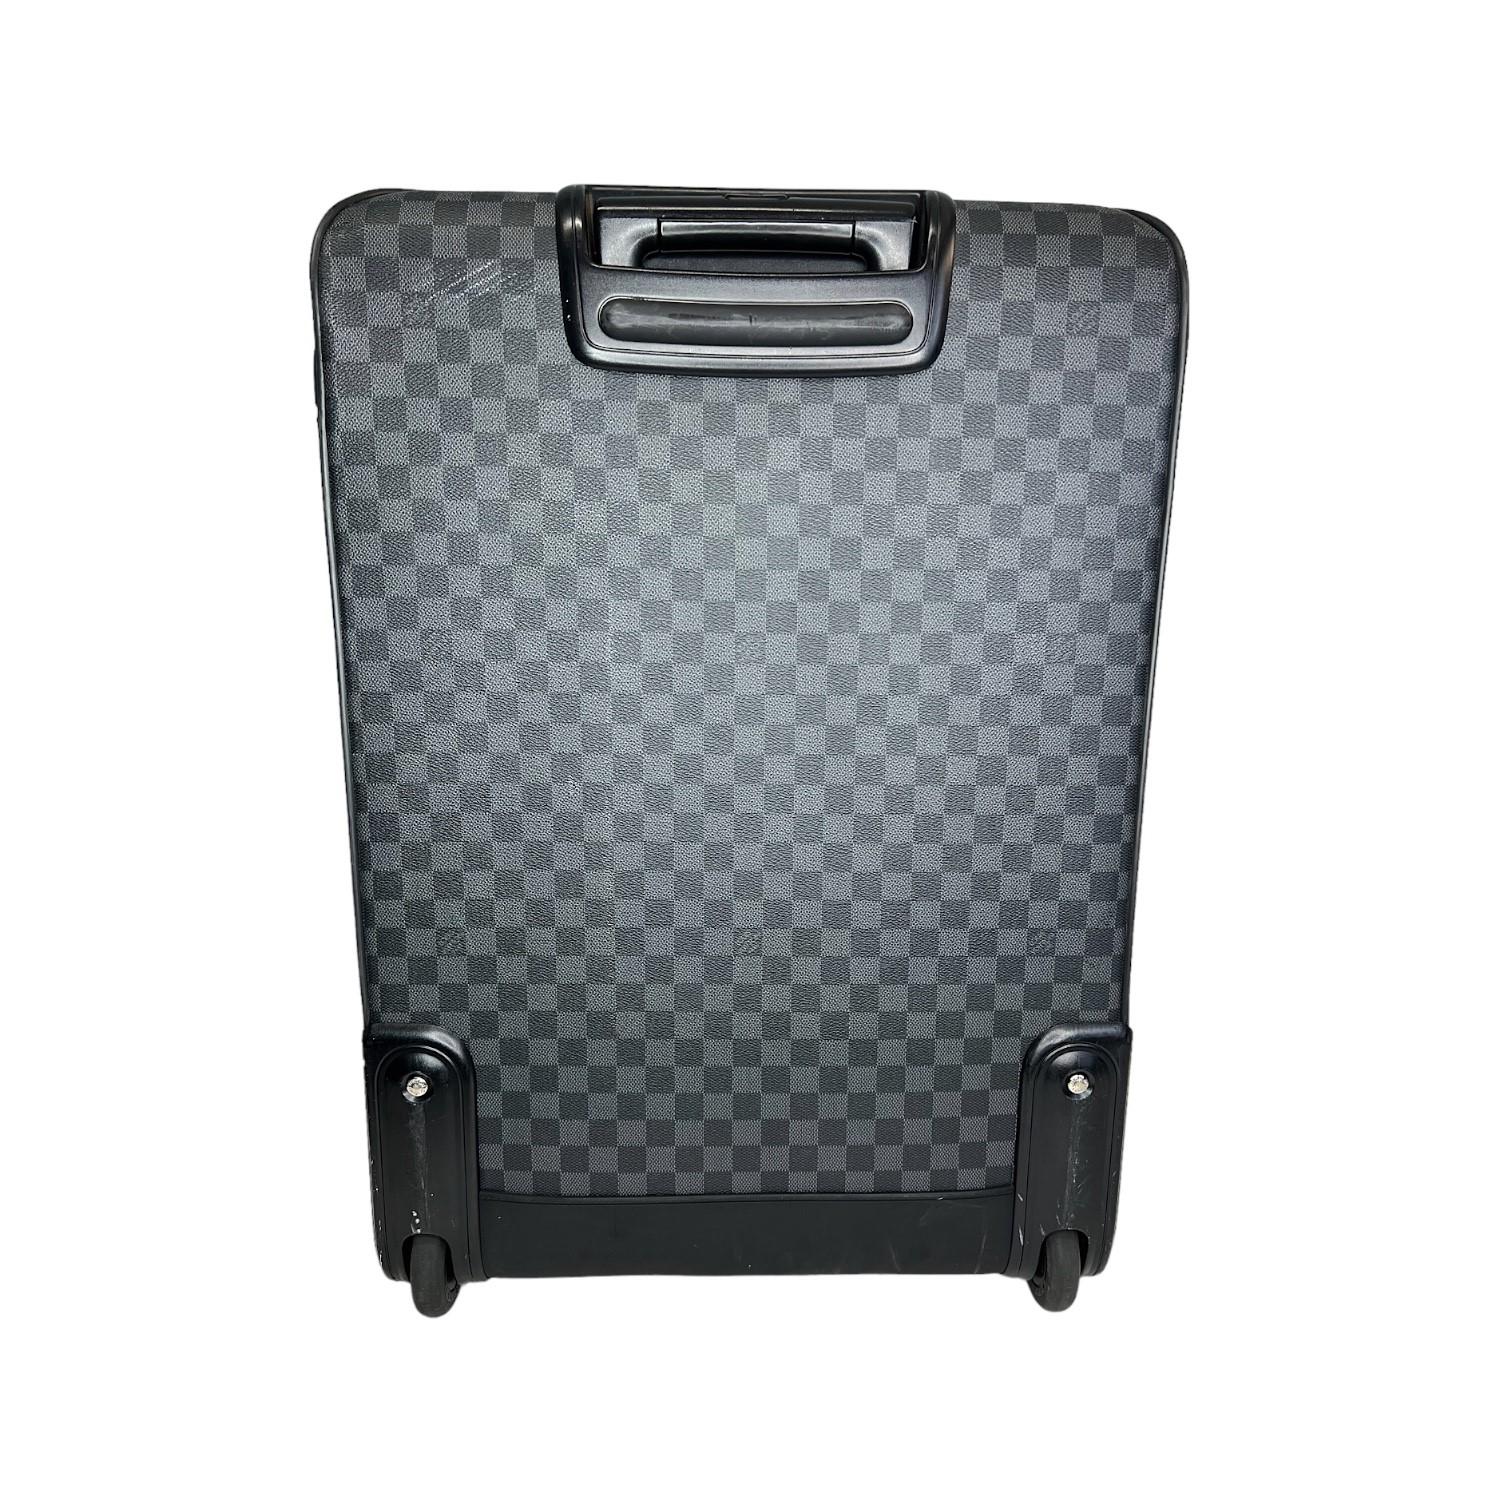 This Louis Vuitton Pégase 65 rolling suitcase was made in France in 2012 and it is finely crafted of the Louis Vuitton Damier Graphite canvas with leather trimming and silver-tone hardware features. It features a frontal zipper pocket. It has a